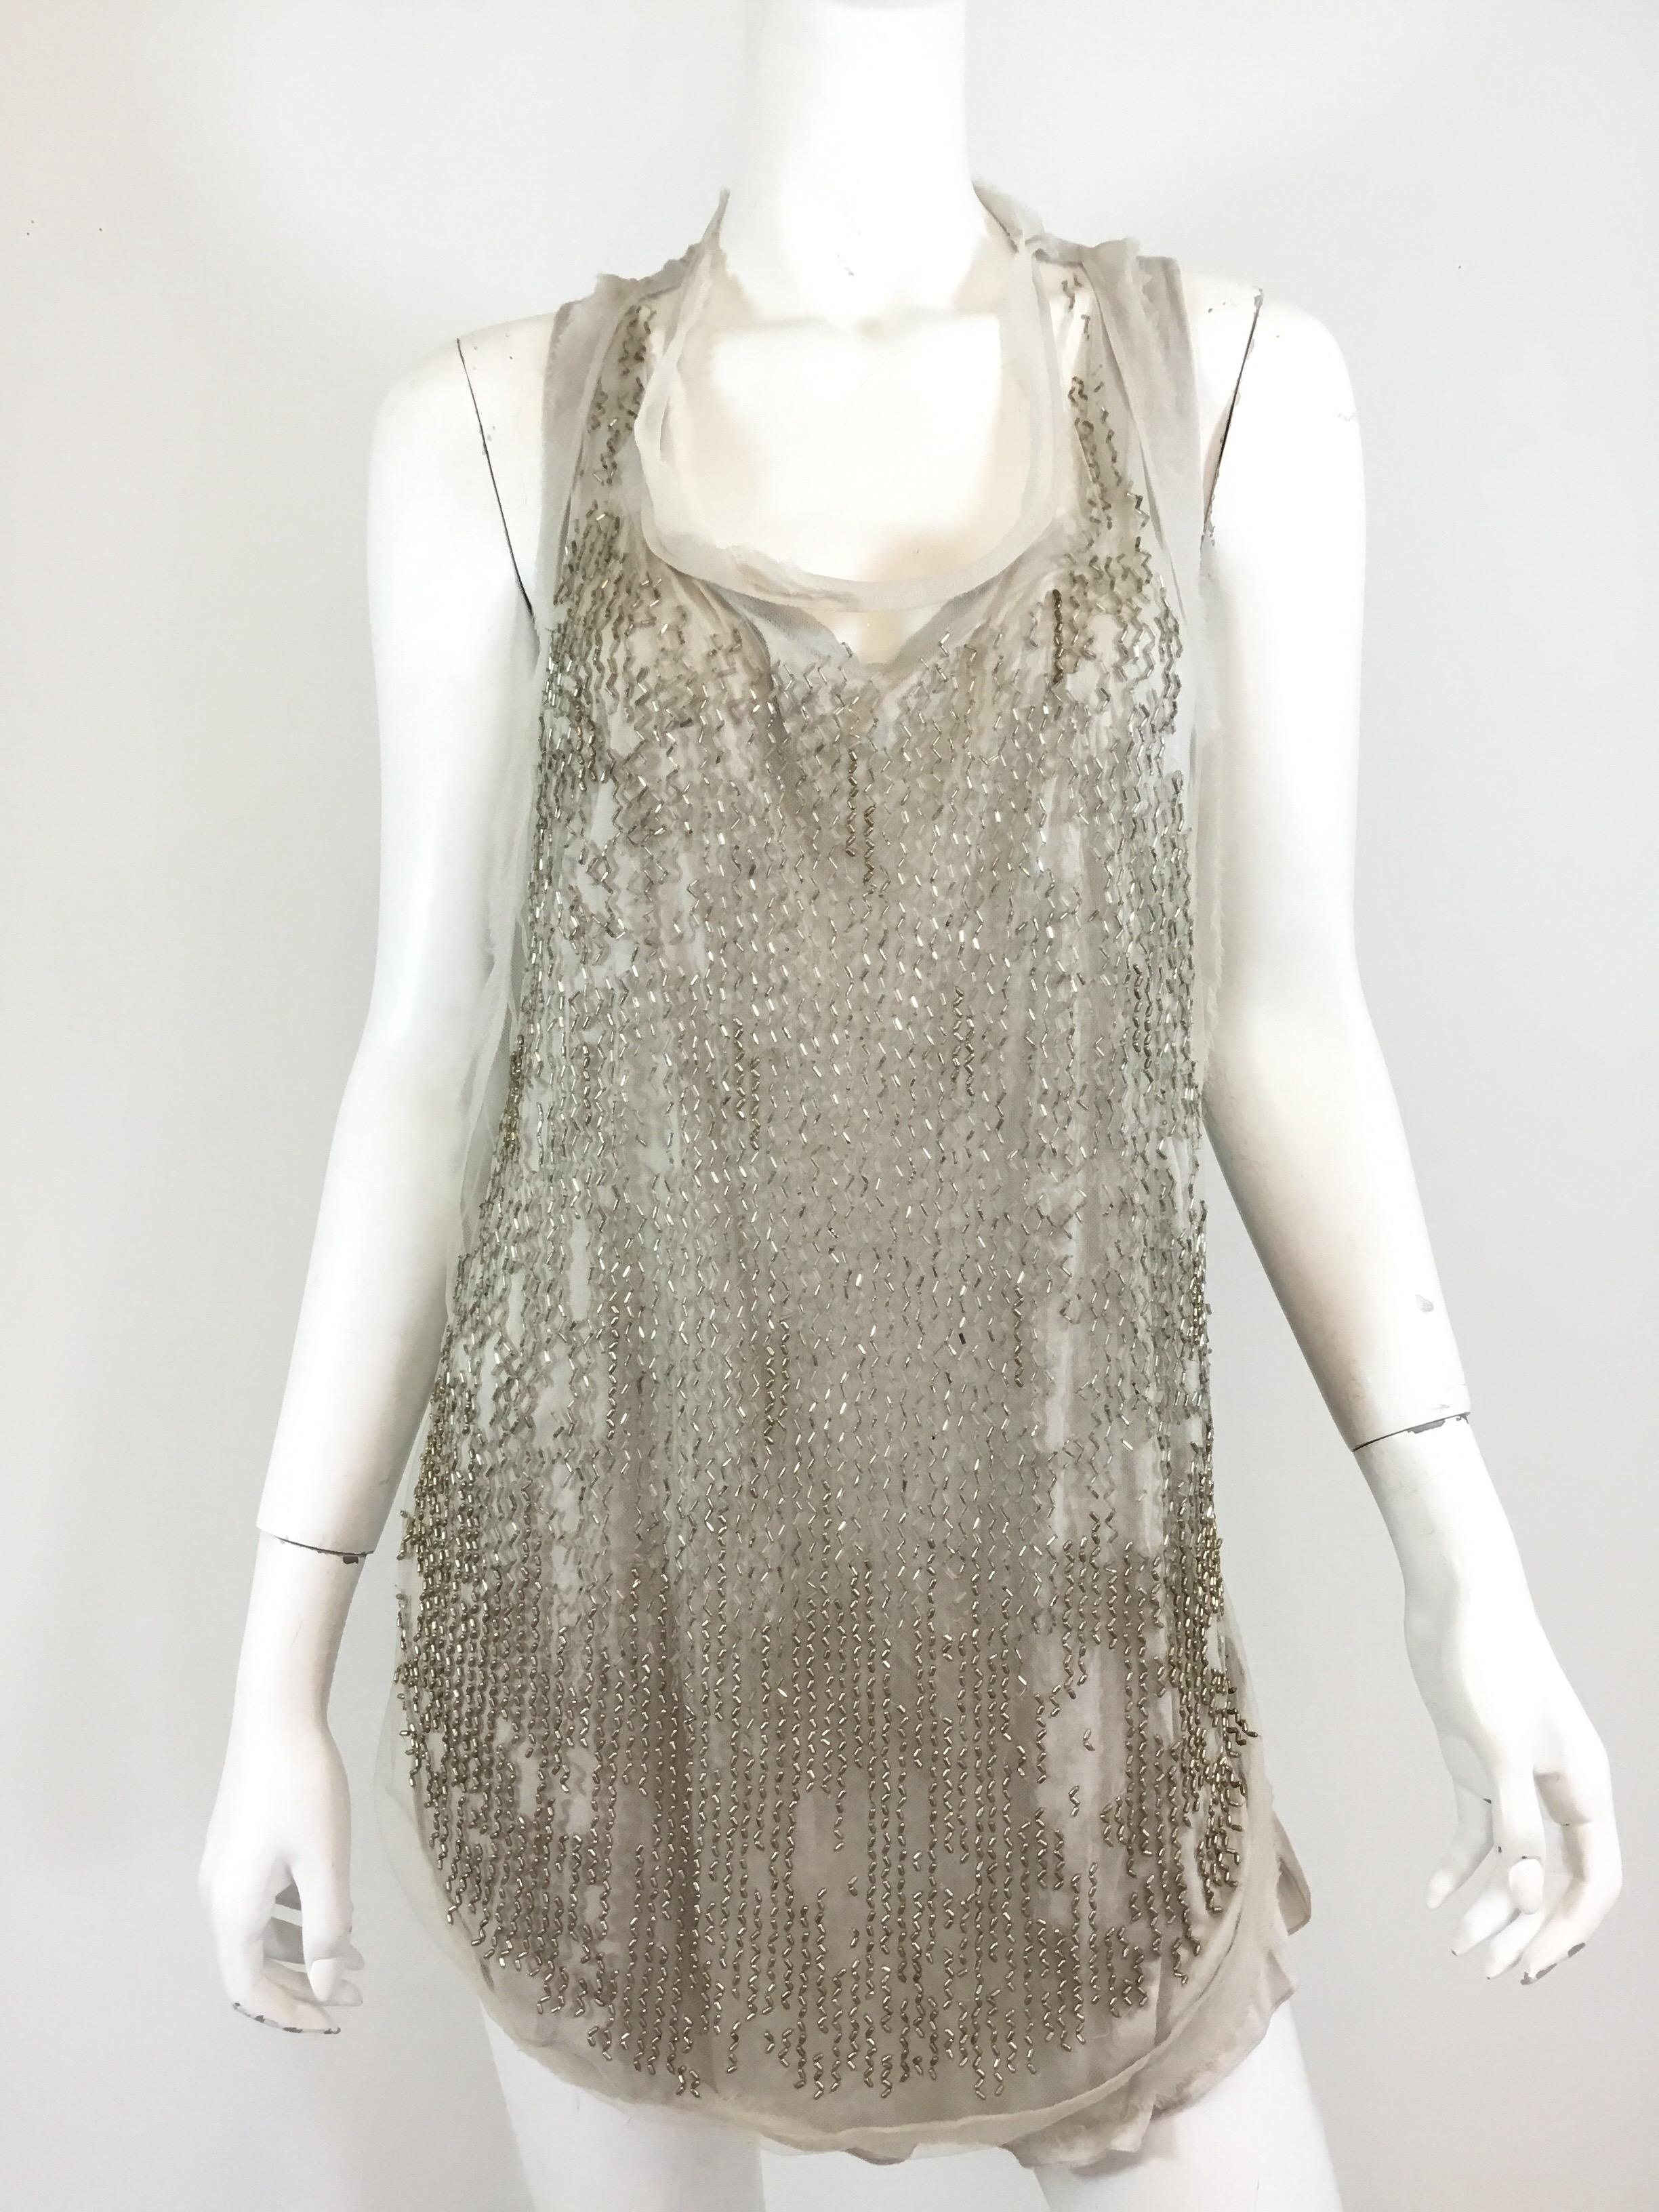 Roberto Cavalli beaded racer back tank top. Top has two layers — bead with mesh and a solid layer underneath. Made in Italy. Top is labeled Size 46.
Great condition.

Bust 40”
Length 27''